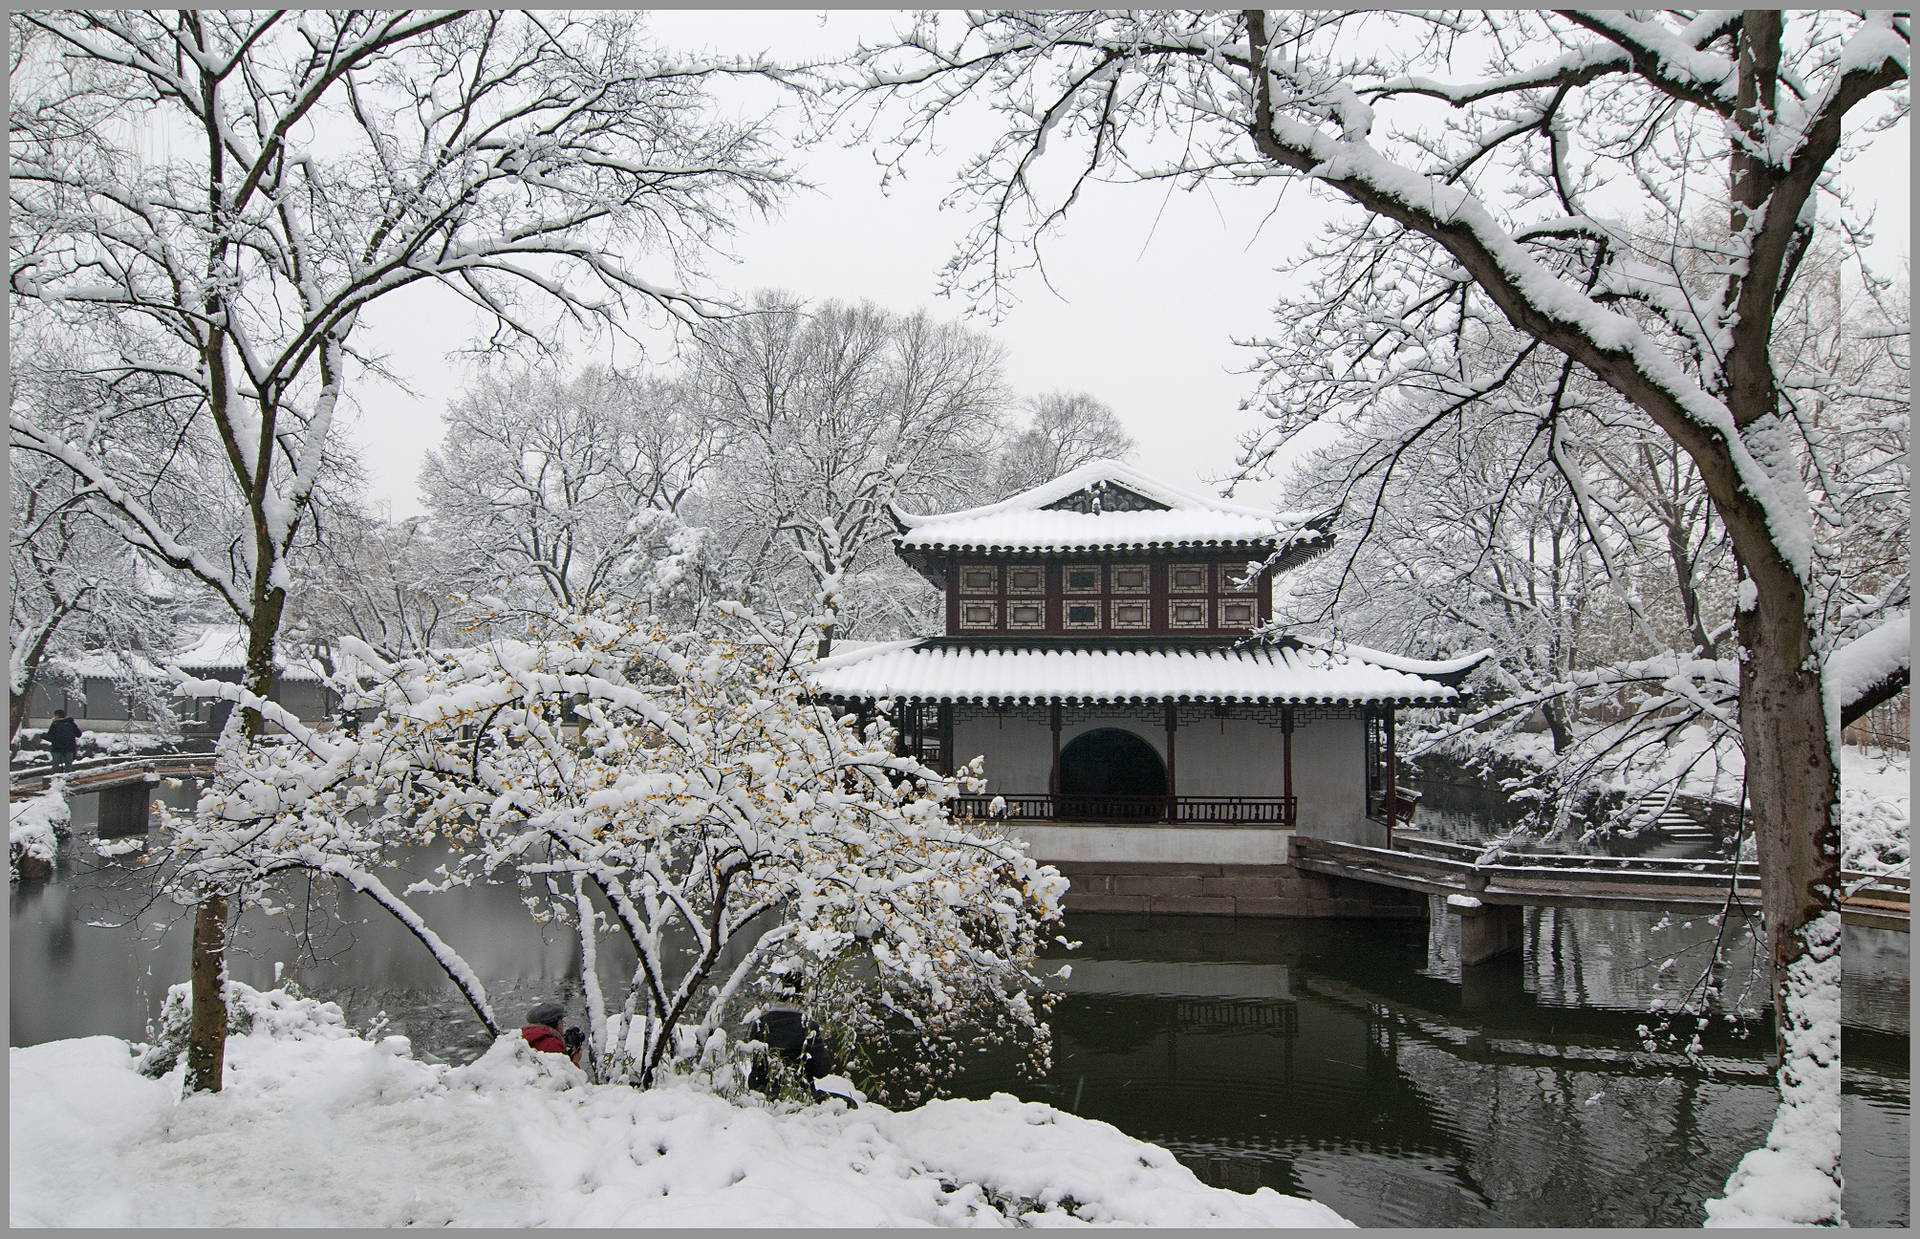 Stunning View Of Humble Administrator's Garden In Suzhou. Background